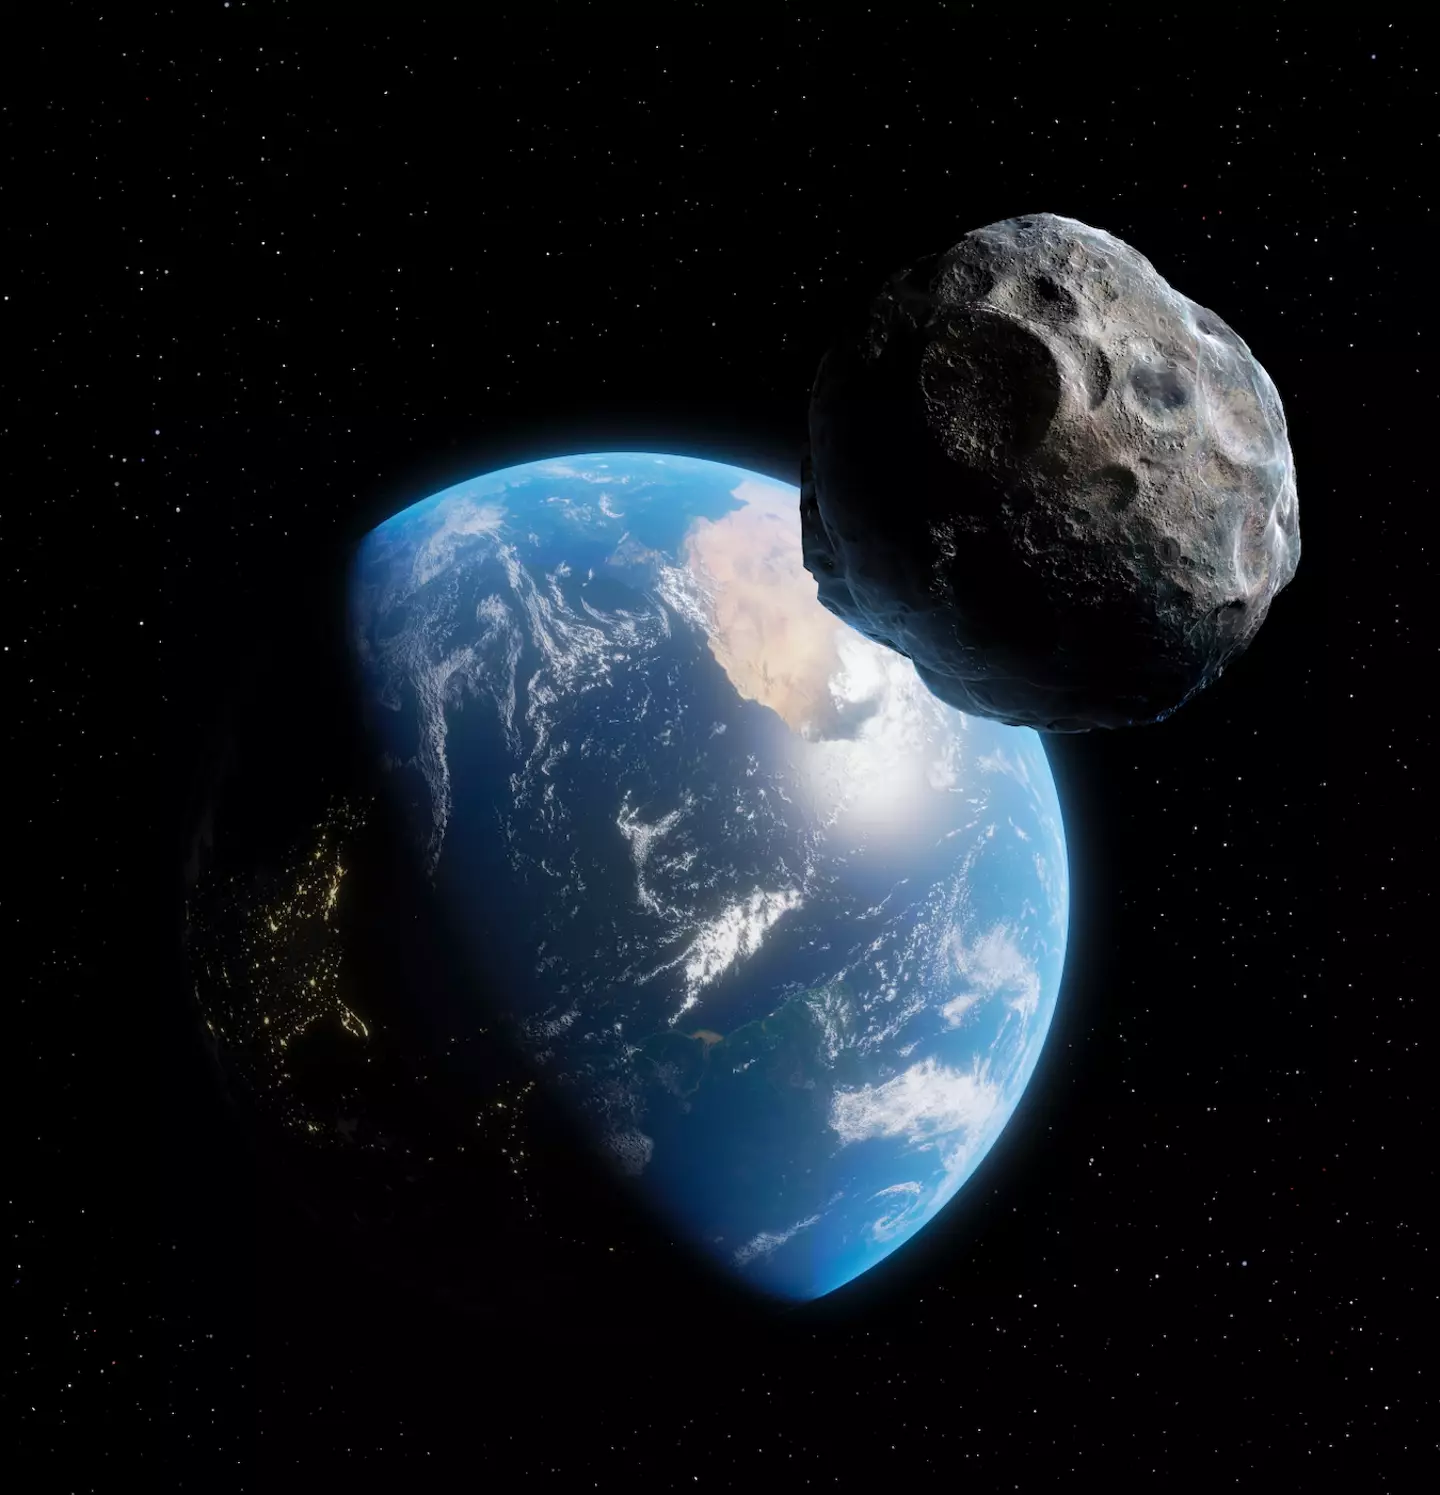 The next five asteroids that are approaching Earth are all expected to pass the planet between January 30 and February 2, 2024.